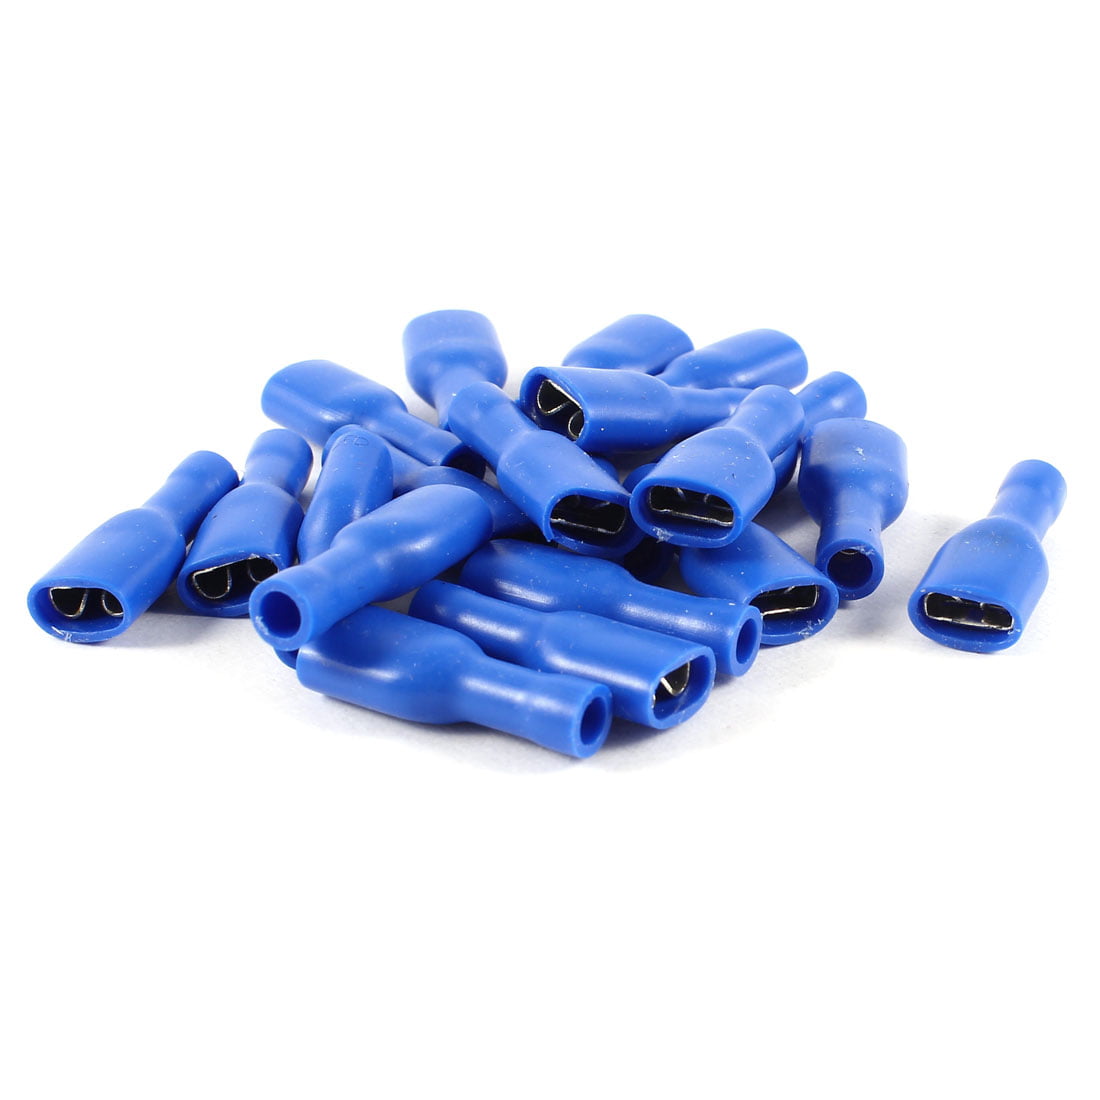 20 x Blue 6.3mm Female Fully Insulated Crimp Spade Connector 